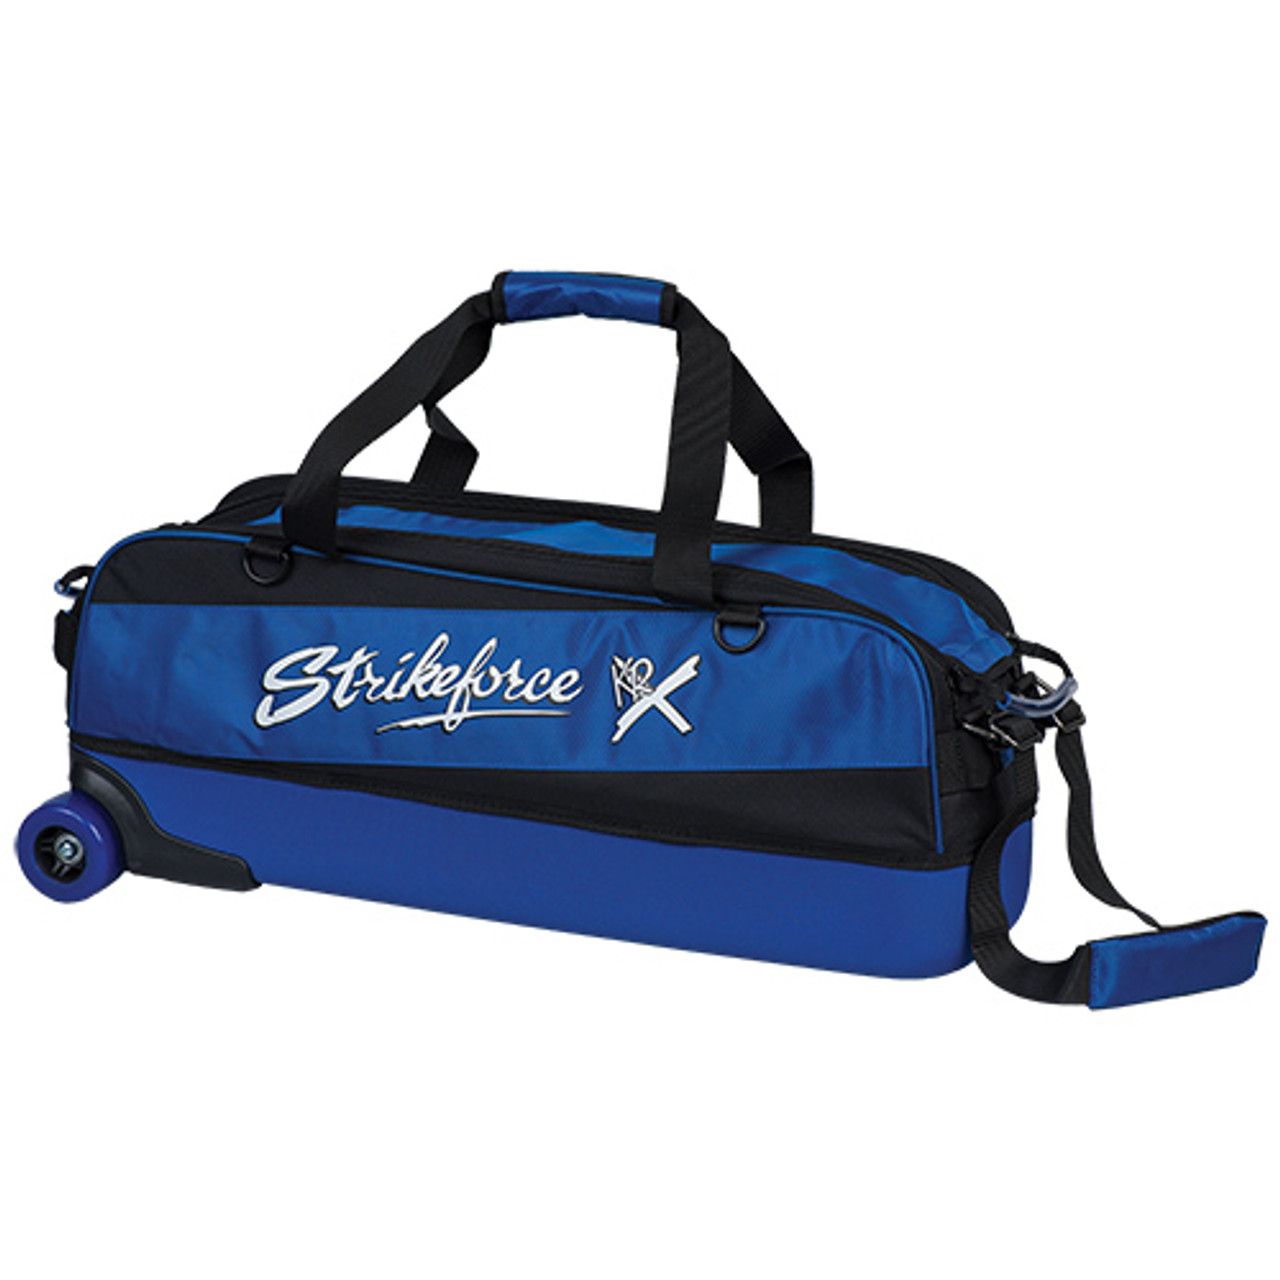 KR Strikeforce Fast Slim Triple Roller Bag Royal

Features:

Weighs under 5 lbs
840D/600D fabric
Wide color coordinated skateboard style wheels
Color coordinated EVA lightweight molded base
Lightweight for easy airline travel
Rear lift handle
Adjustable tow strap
Carrying handles w/padded comfort wrap
9.5" W x 11" D x 26" H
Optional shoe bag easily attaches to the top of this slim triple. Shoe bag sold separately